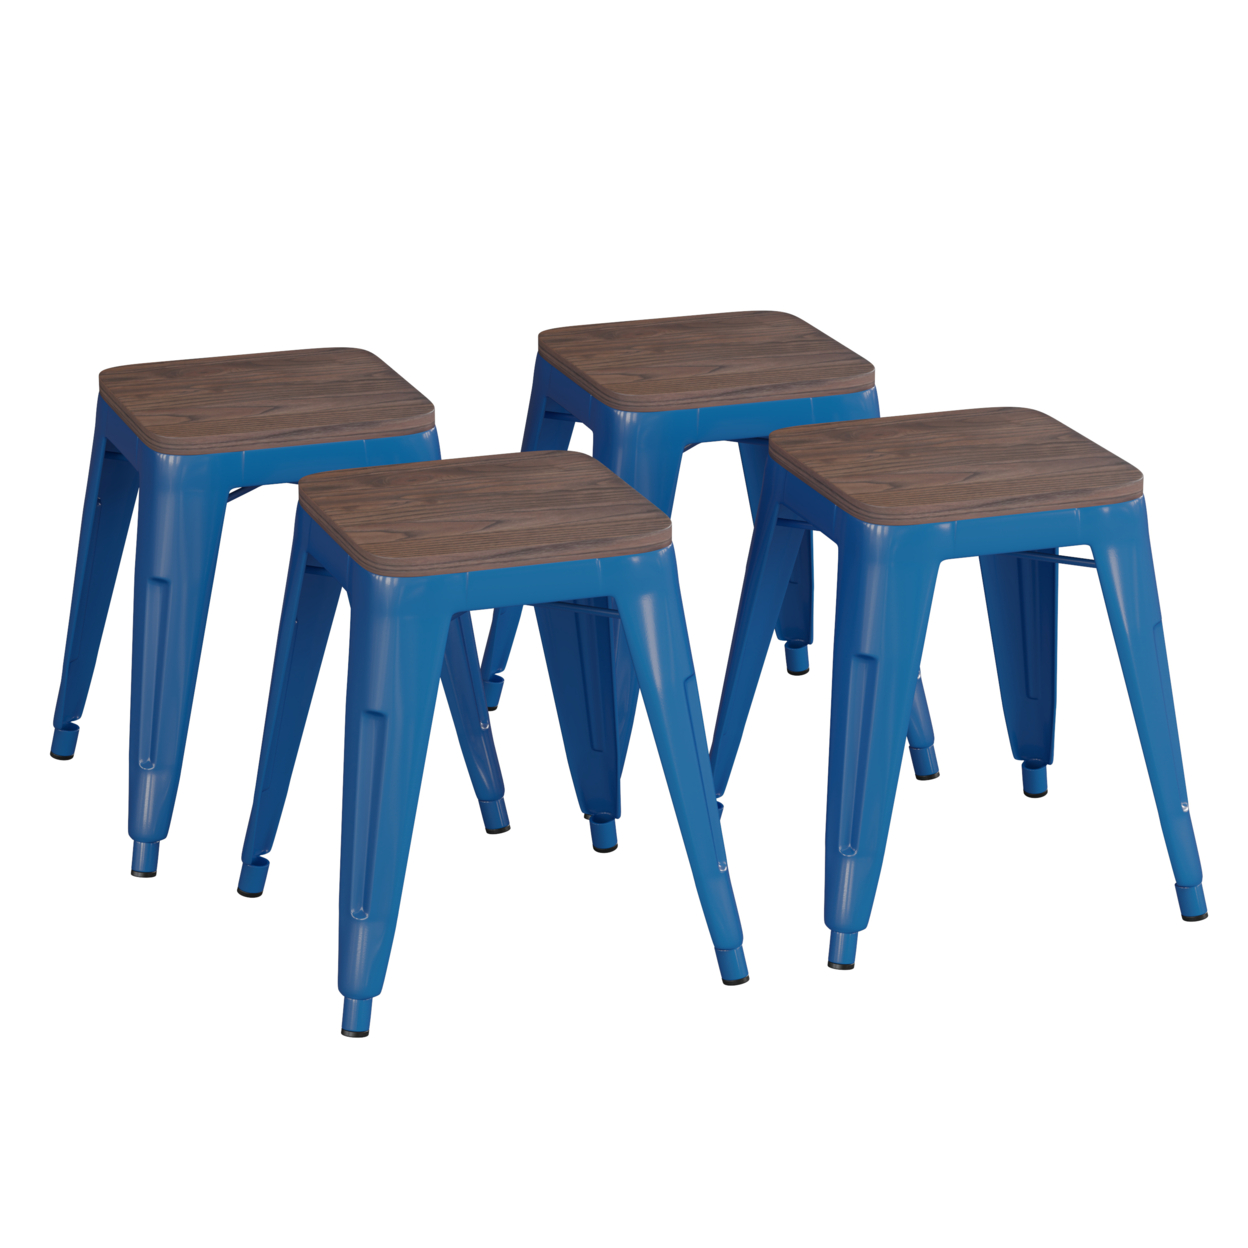 18 Backless Table Height Stool With Wooden Seat, Stackable Royal Blue Metal Indoor Dining Stool, Commercial Grade - Set Of 4